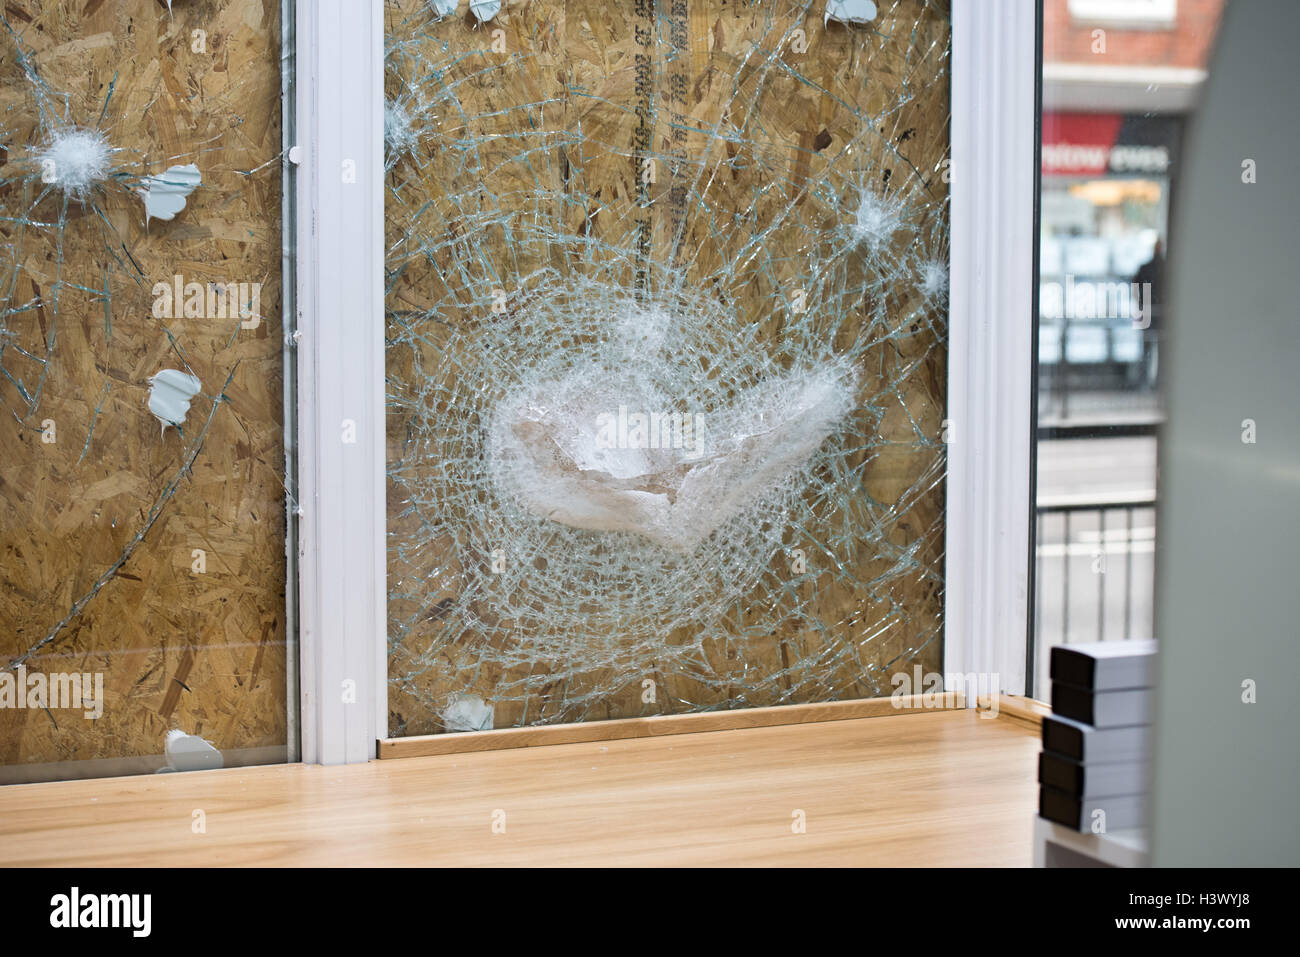 Brentwood, Essex, 12th October 2016: Thieves used axes to smash their way in to high end jeweler Bonds of Brentwood Credit:  Ian Davidson/Alamy Live News Stock Photo